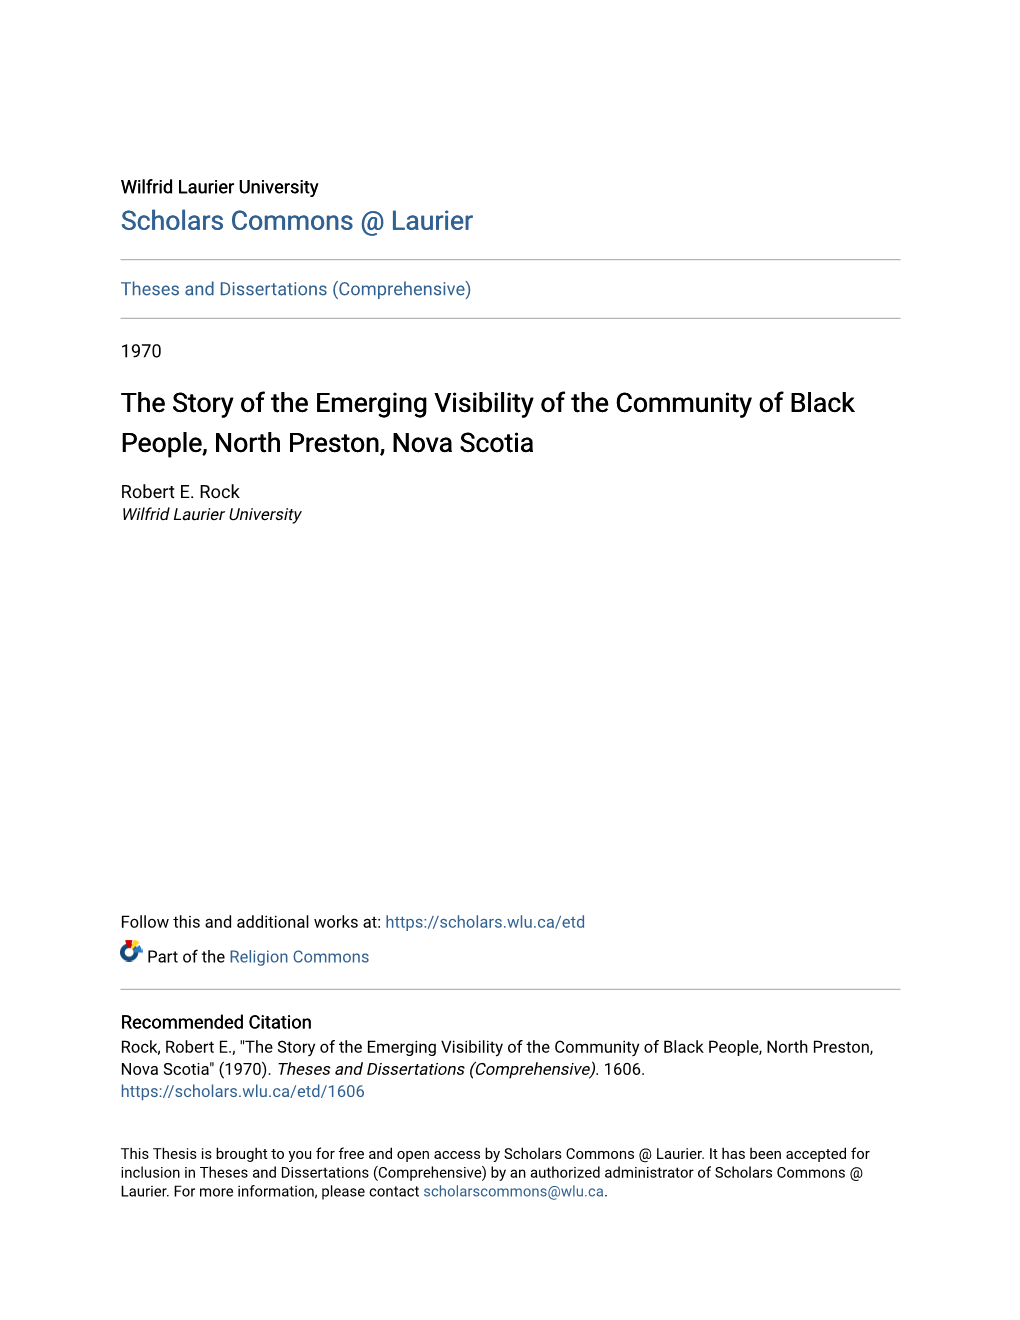 The Story of the Emerging Visibility of the Community of Black People, North Preston, Nova Scotia